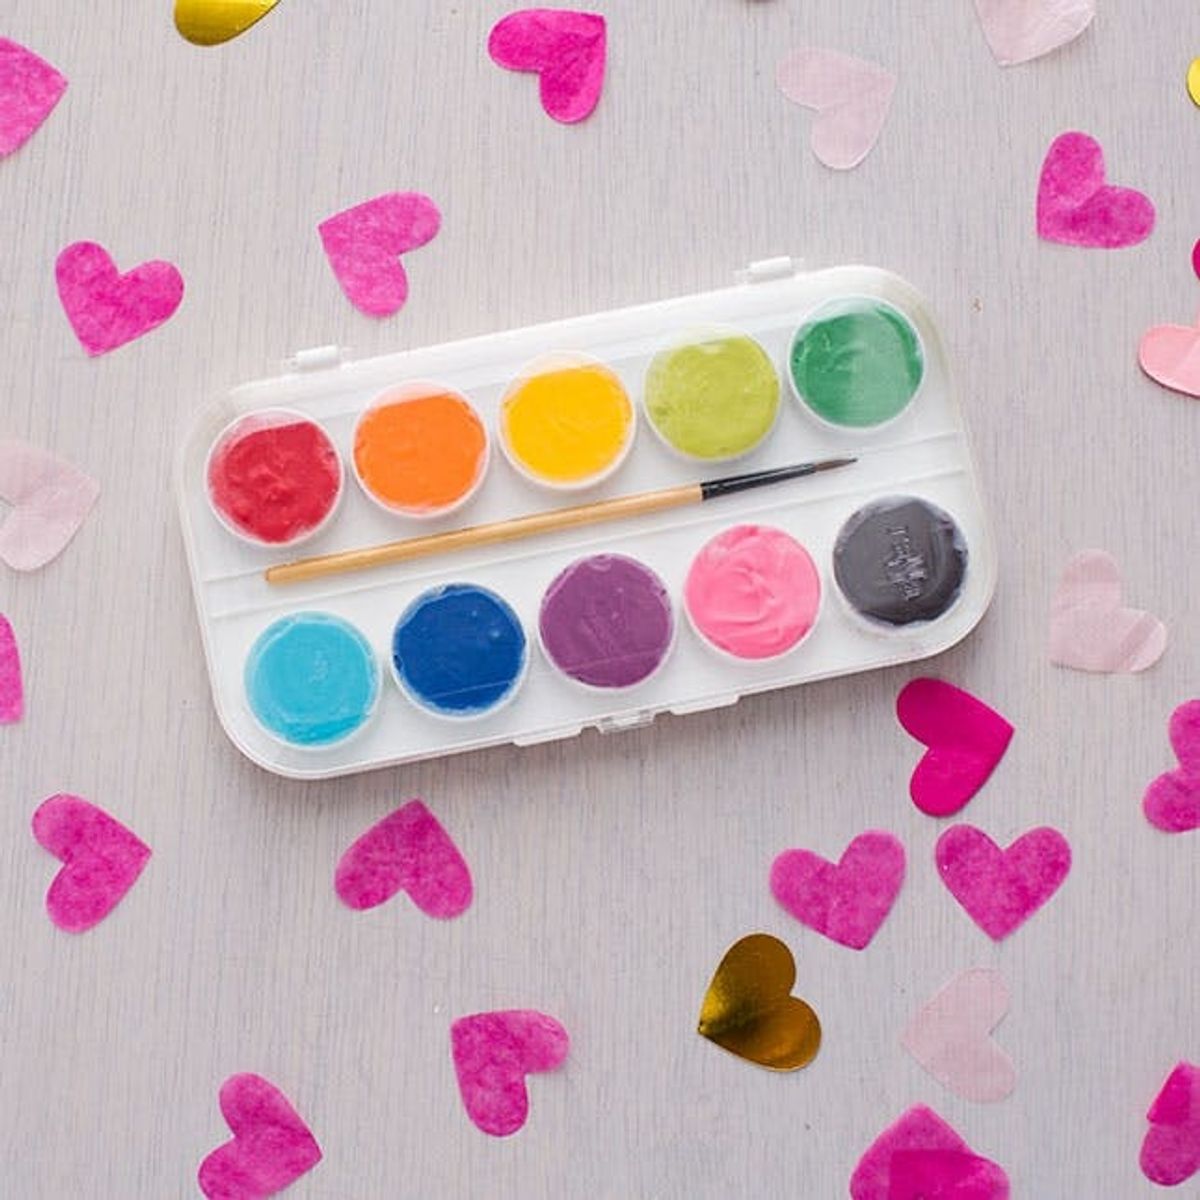 How to Upcycle a Paint Palette into THE Prettiest Box of Chocolates